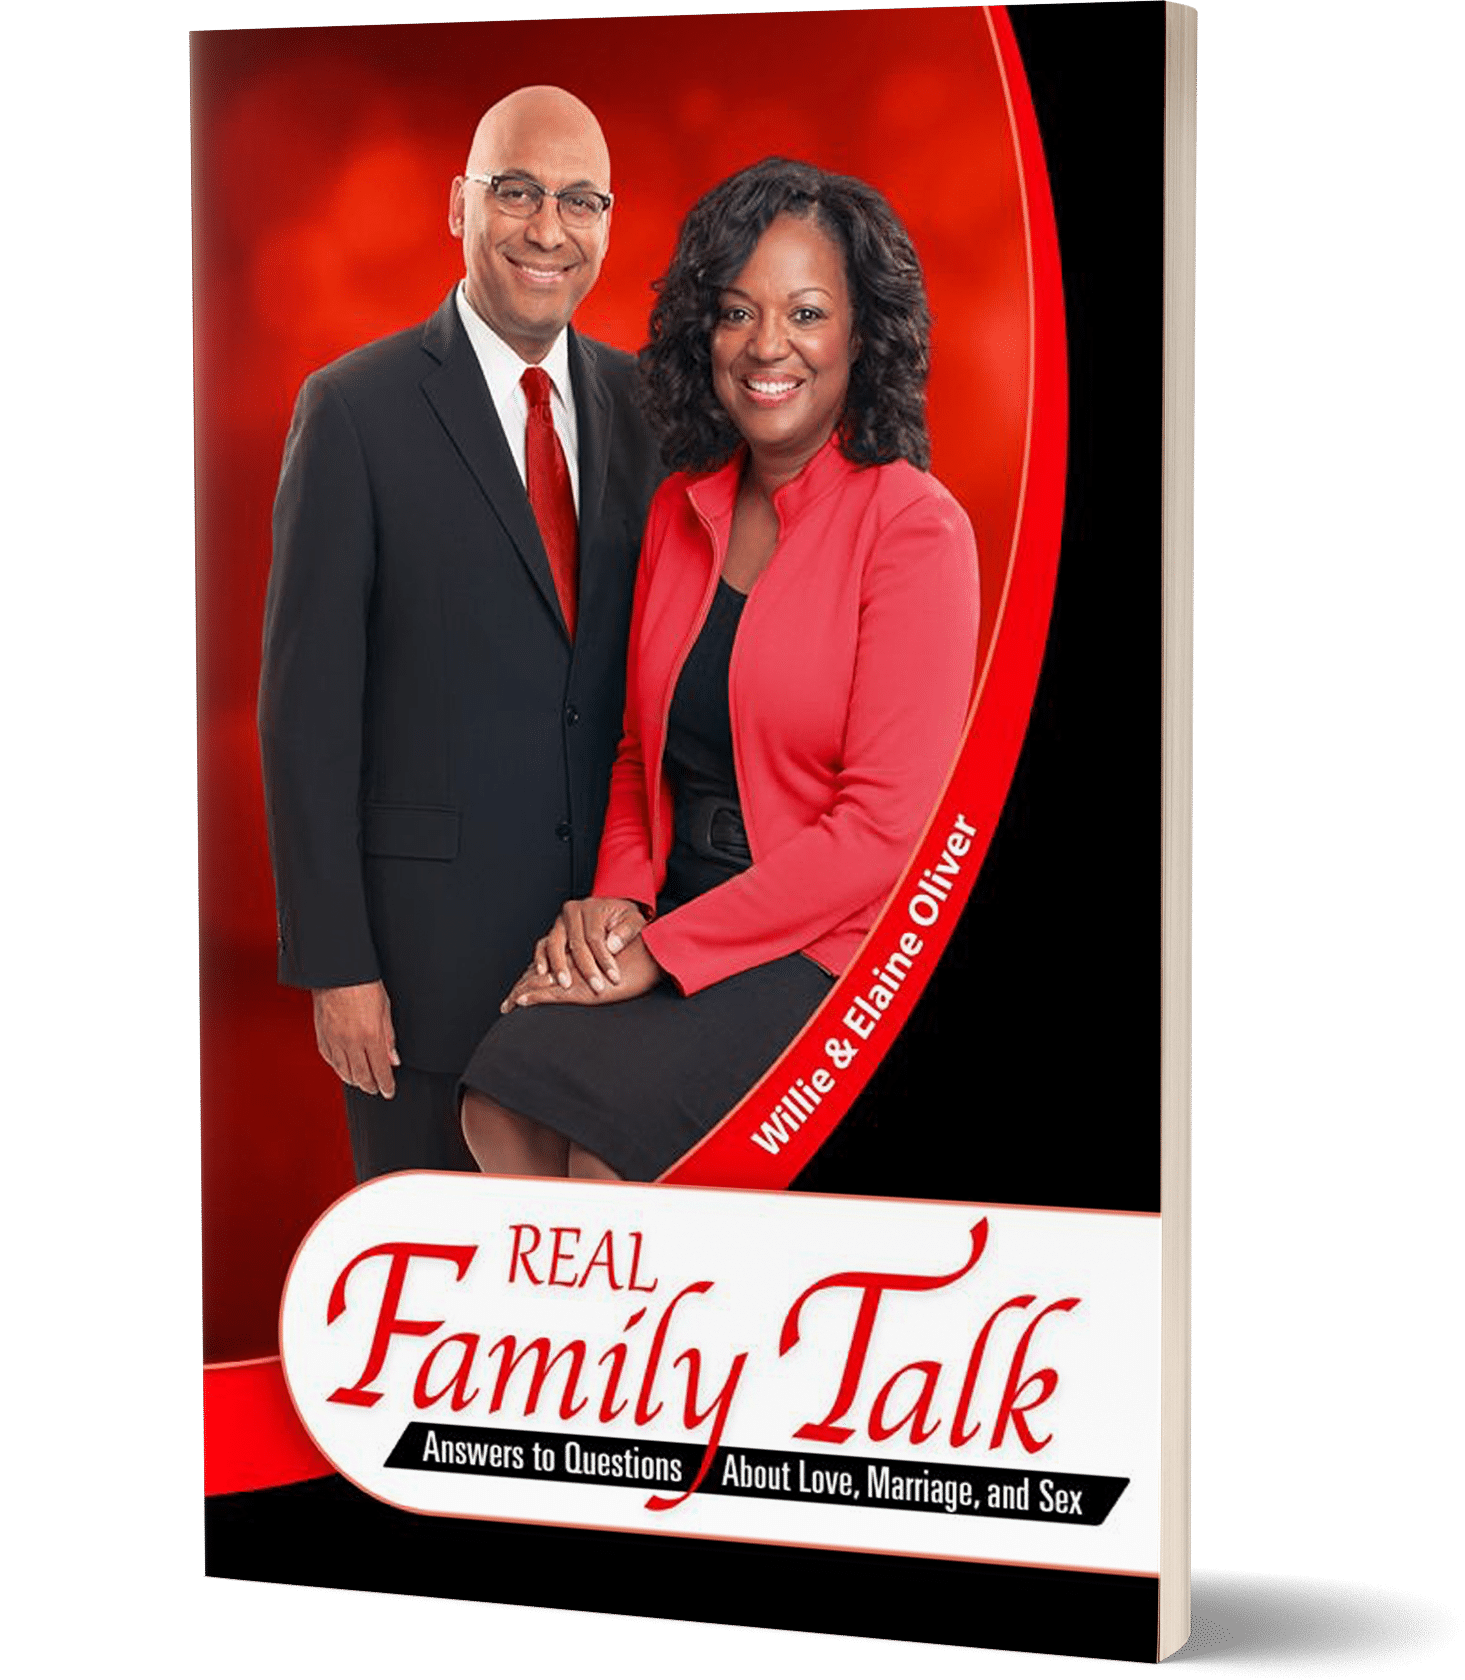 Real Family Talk Answers to Questions About Love, Marriage, and